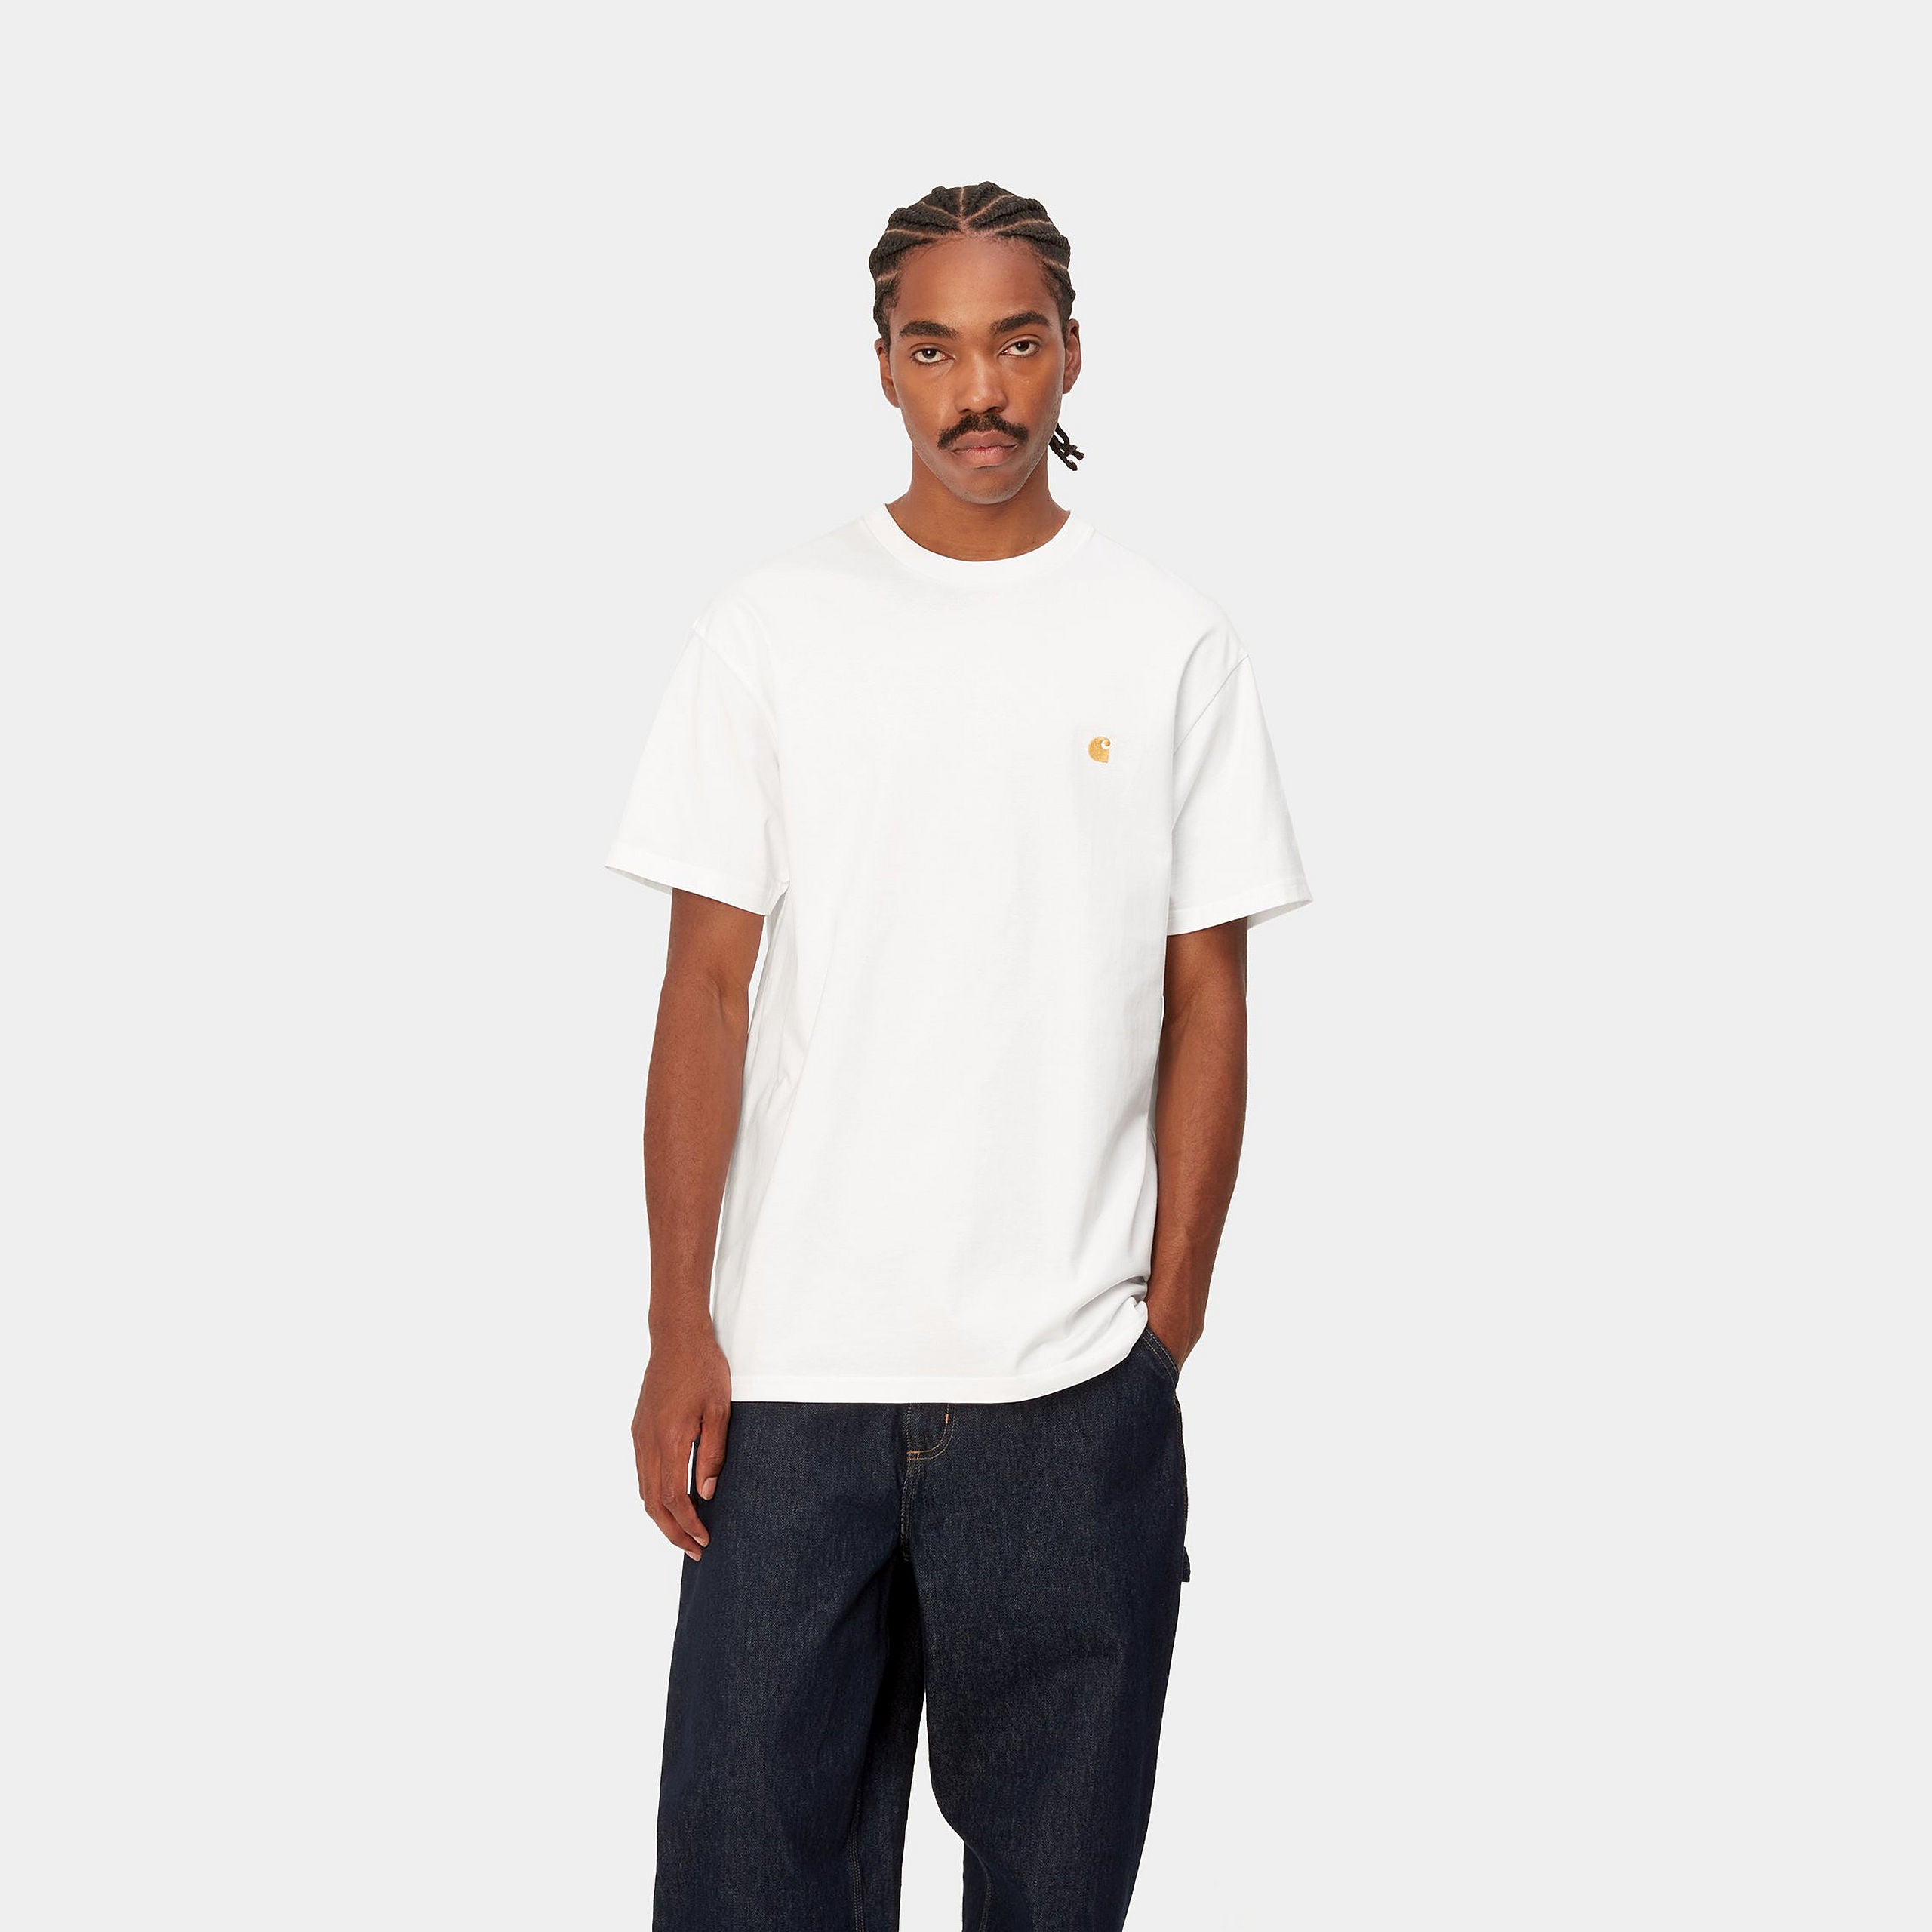 S/S Chase T-shirt - Carhartt WIP